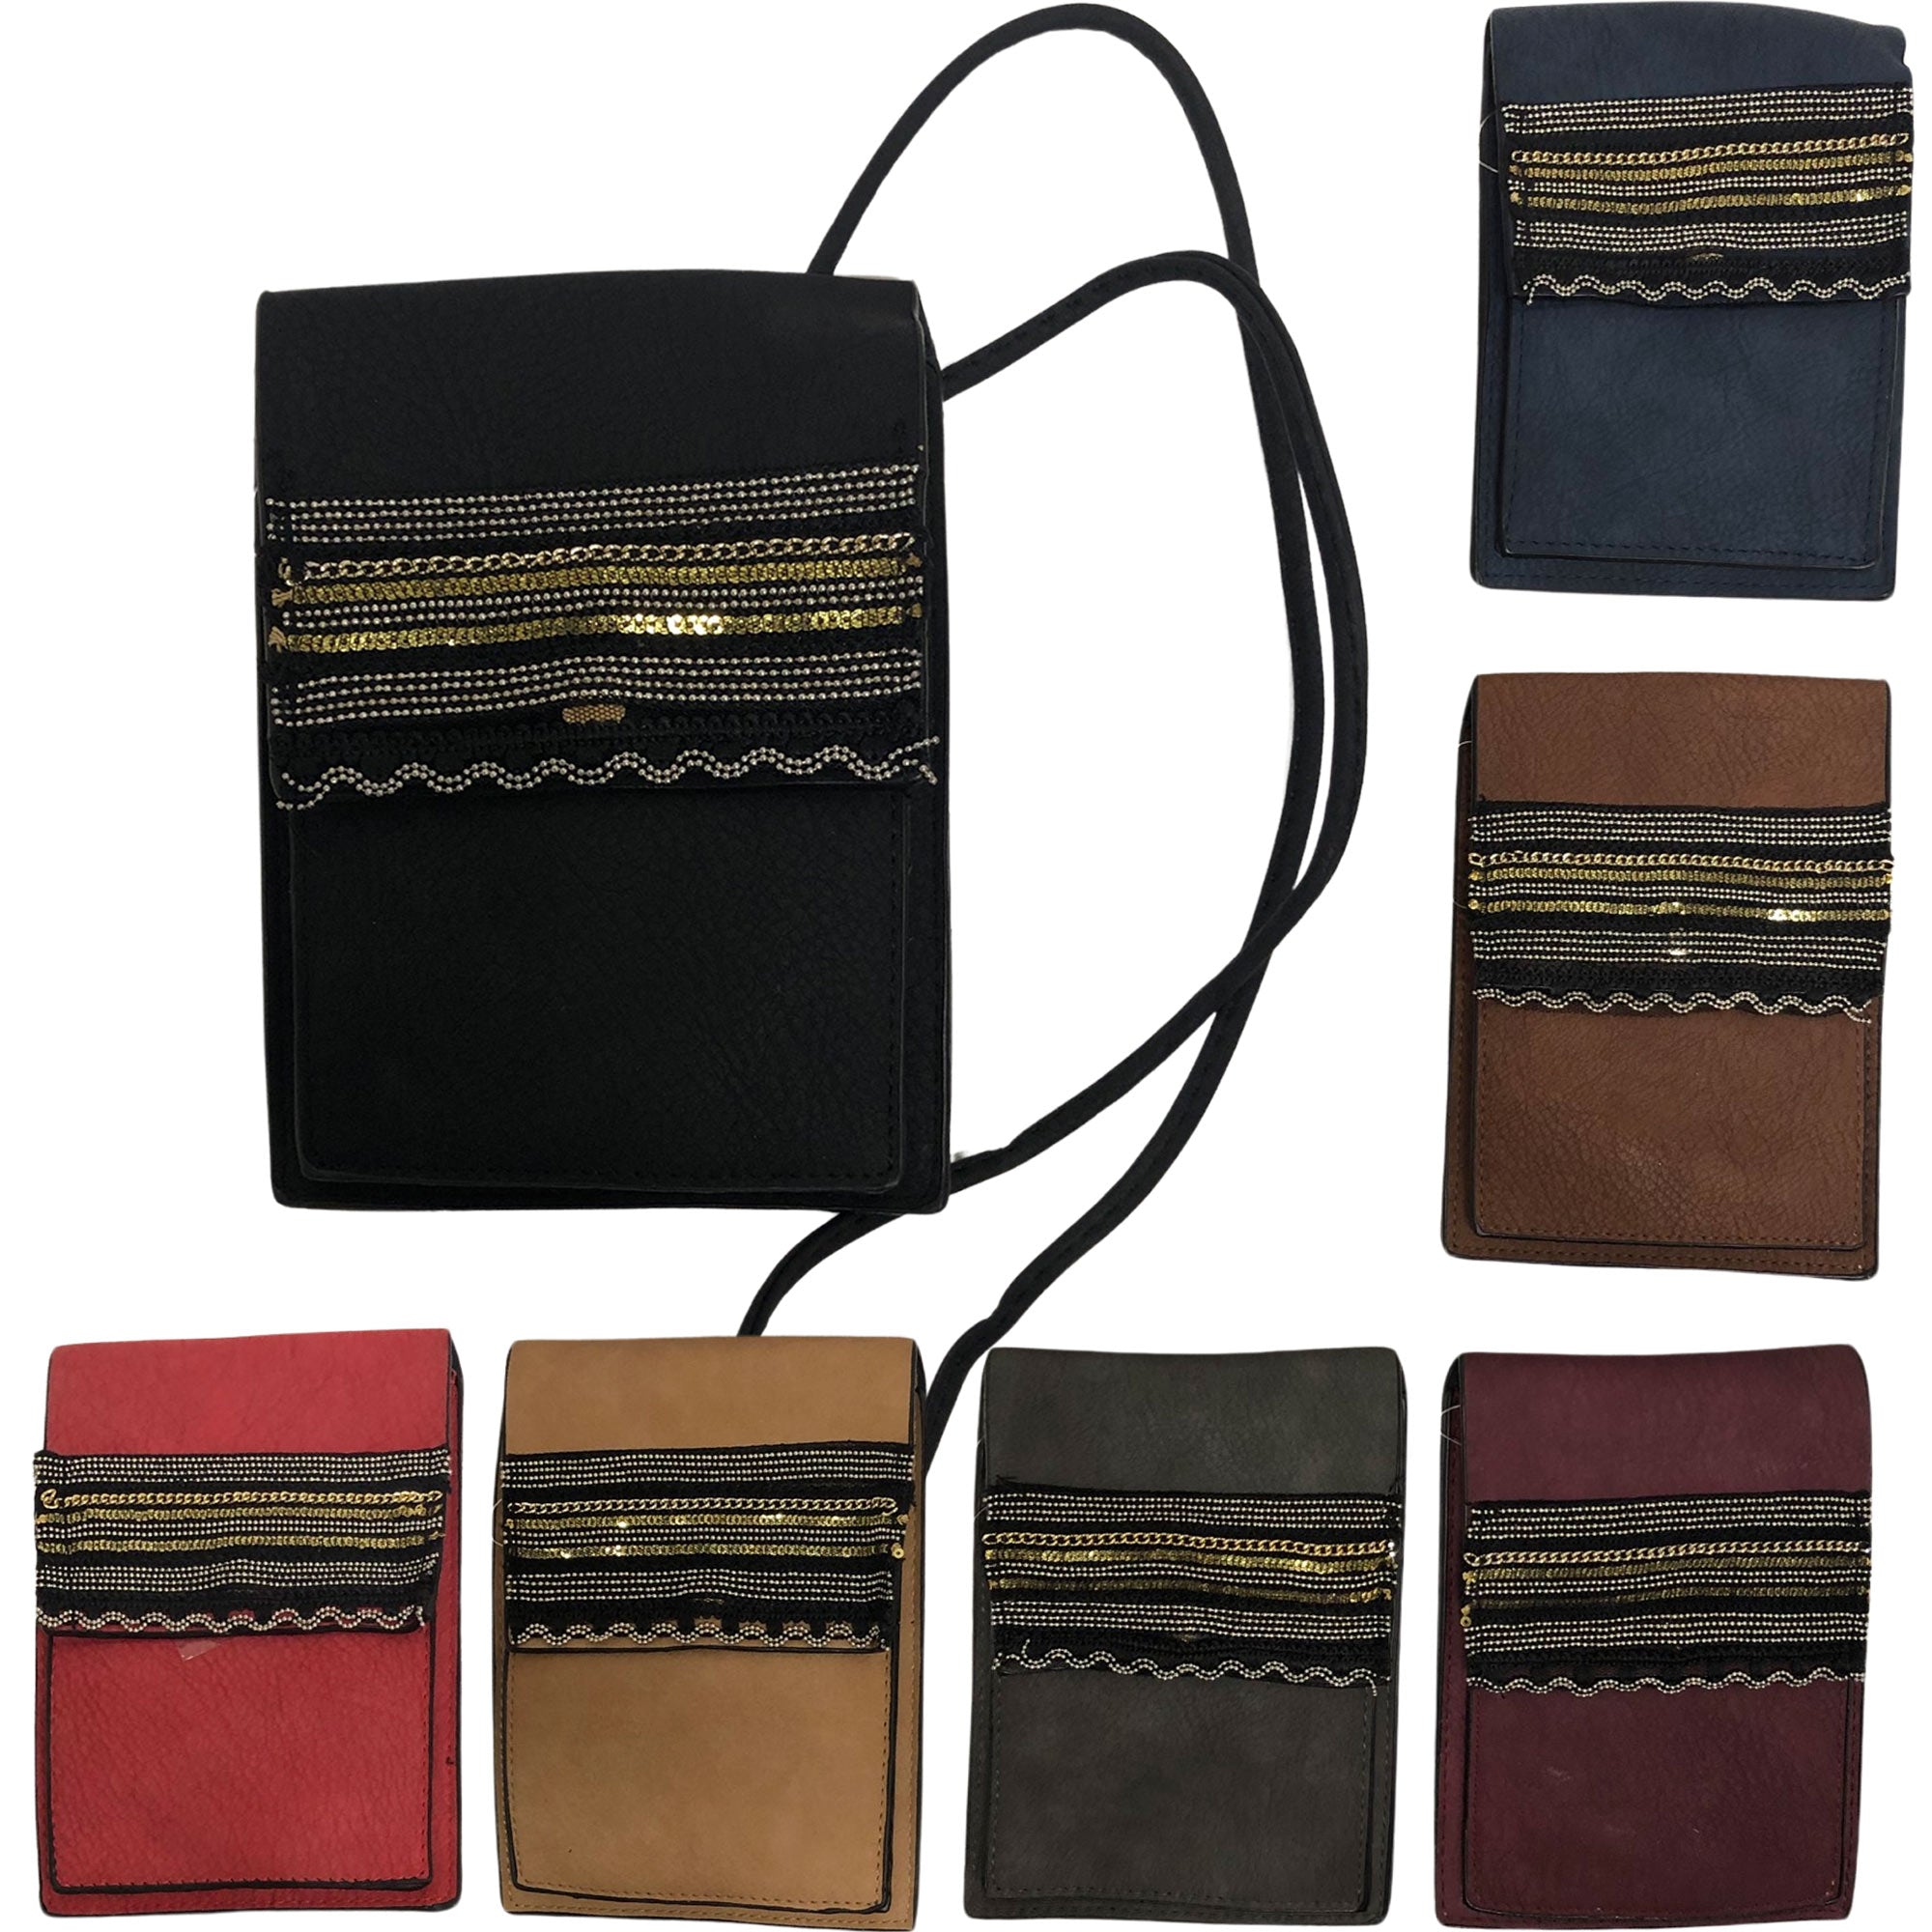 CLEARANCE MINI CROSSBODY SEQUIN EMBROIDERY (CASE OF 48 - $1.75 / PIECE)  Wholesale Crossbody Bag in Assorted Colors SKU: M196-36-48